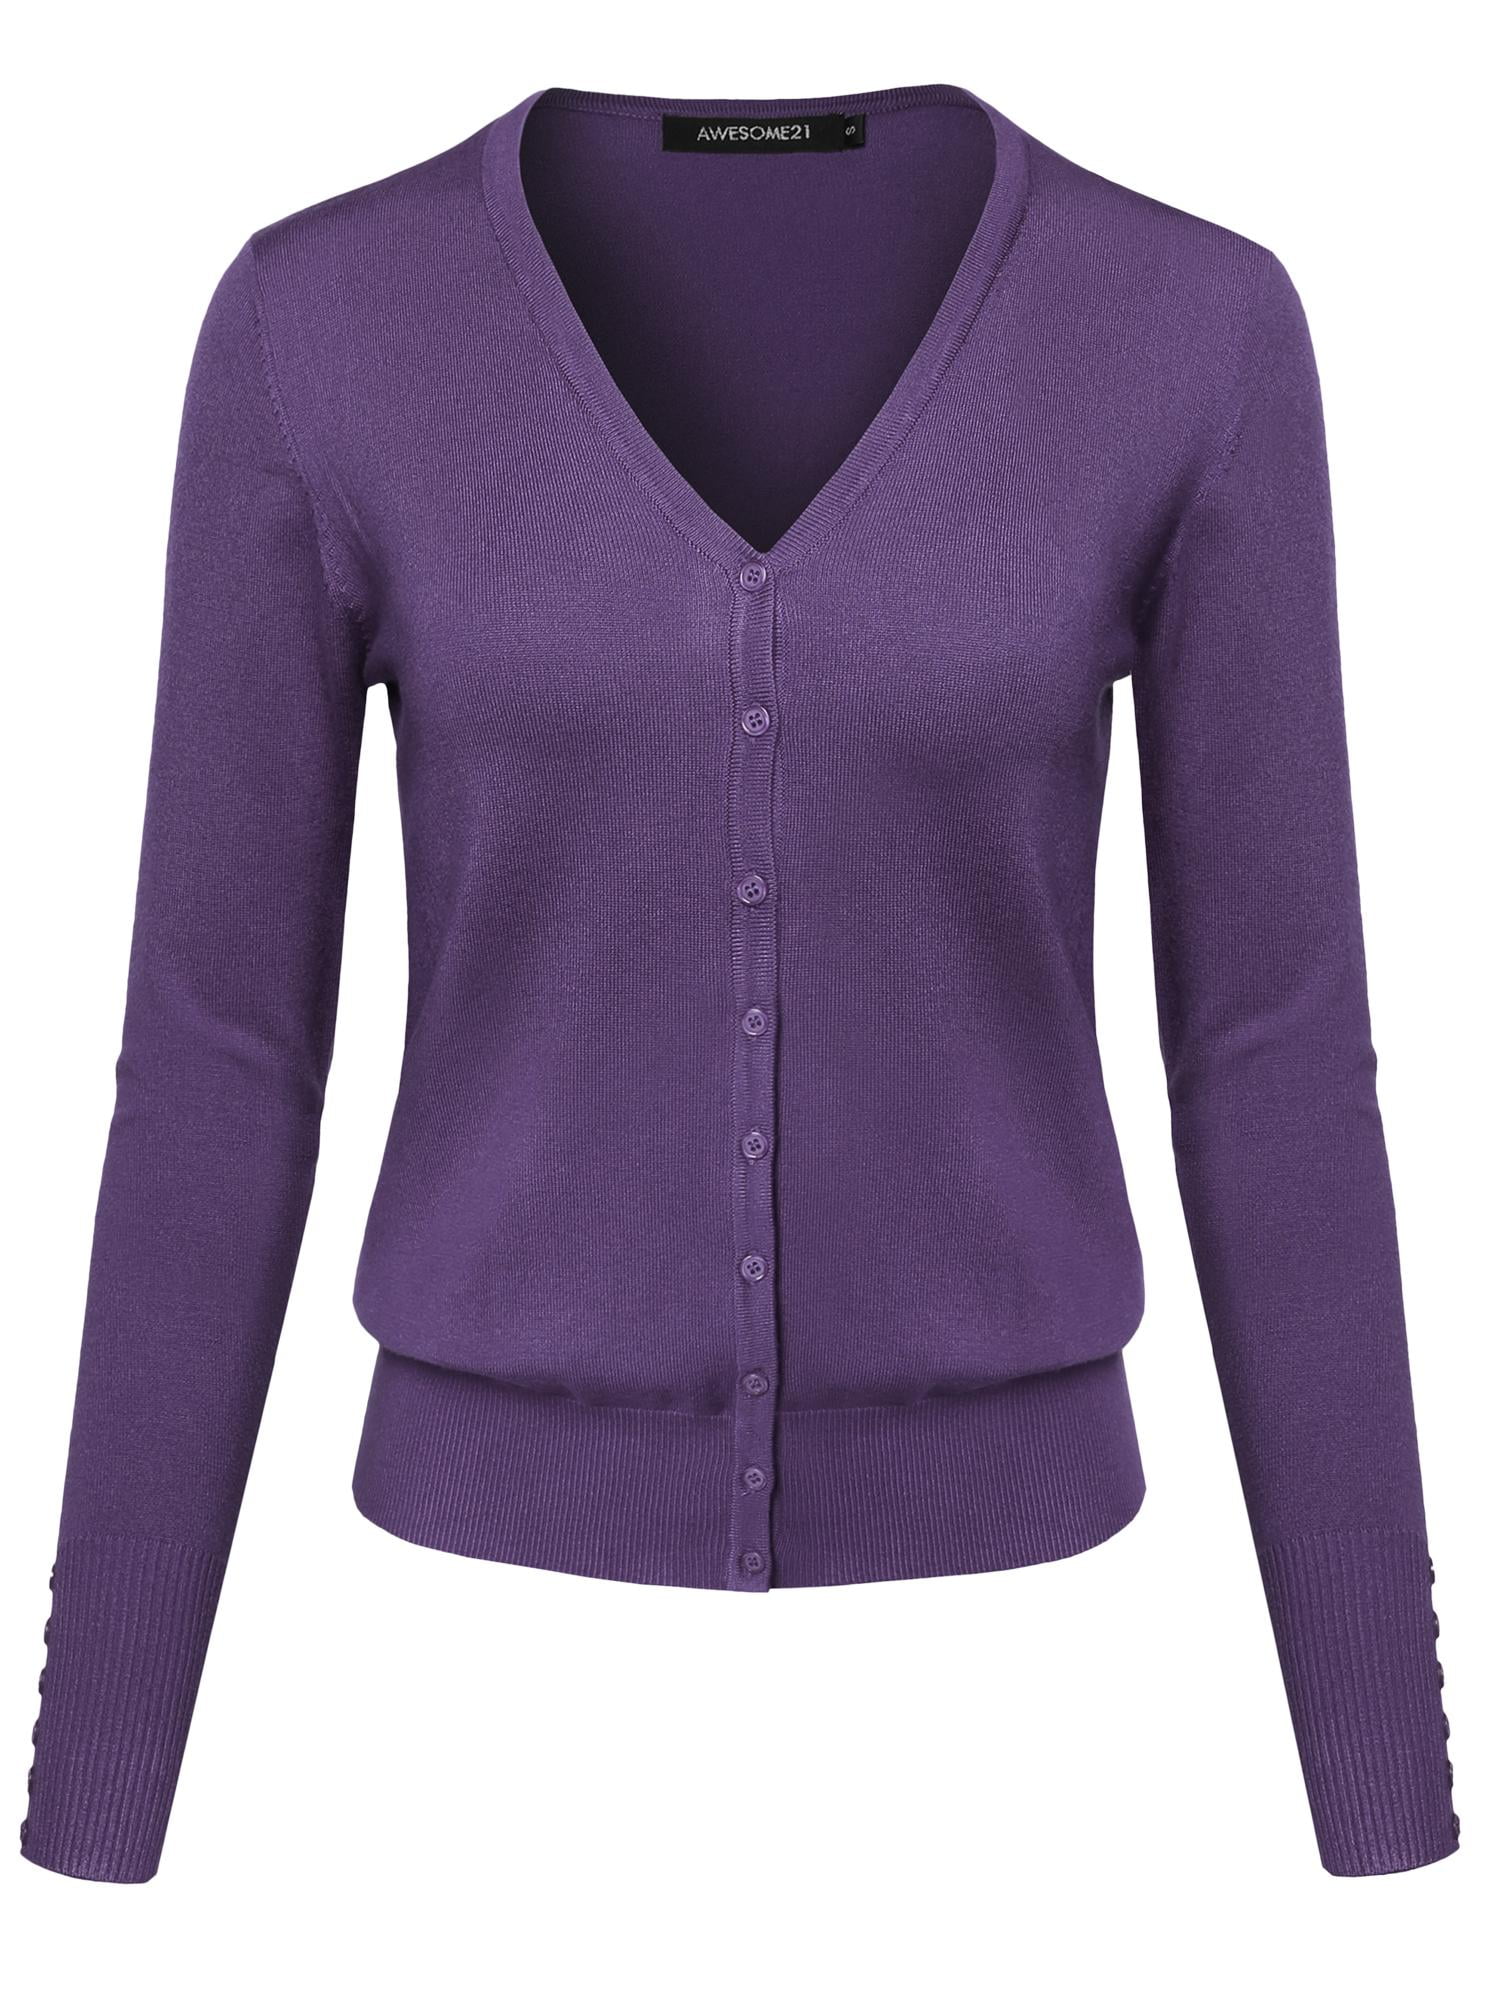 FashionOutfit Women's Basic Solid V-Neck Button Closure Long Sleeves Sweater  Cardigan - Walmart.com